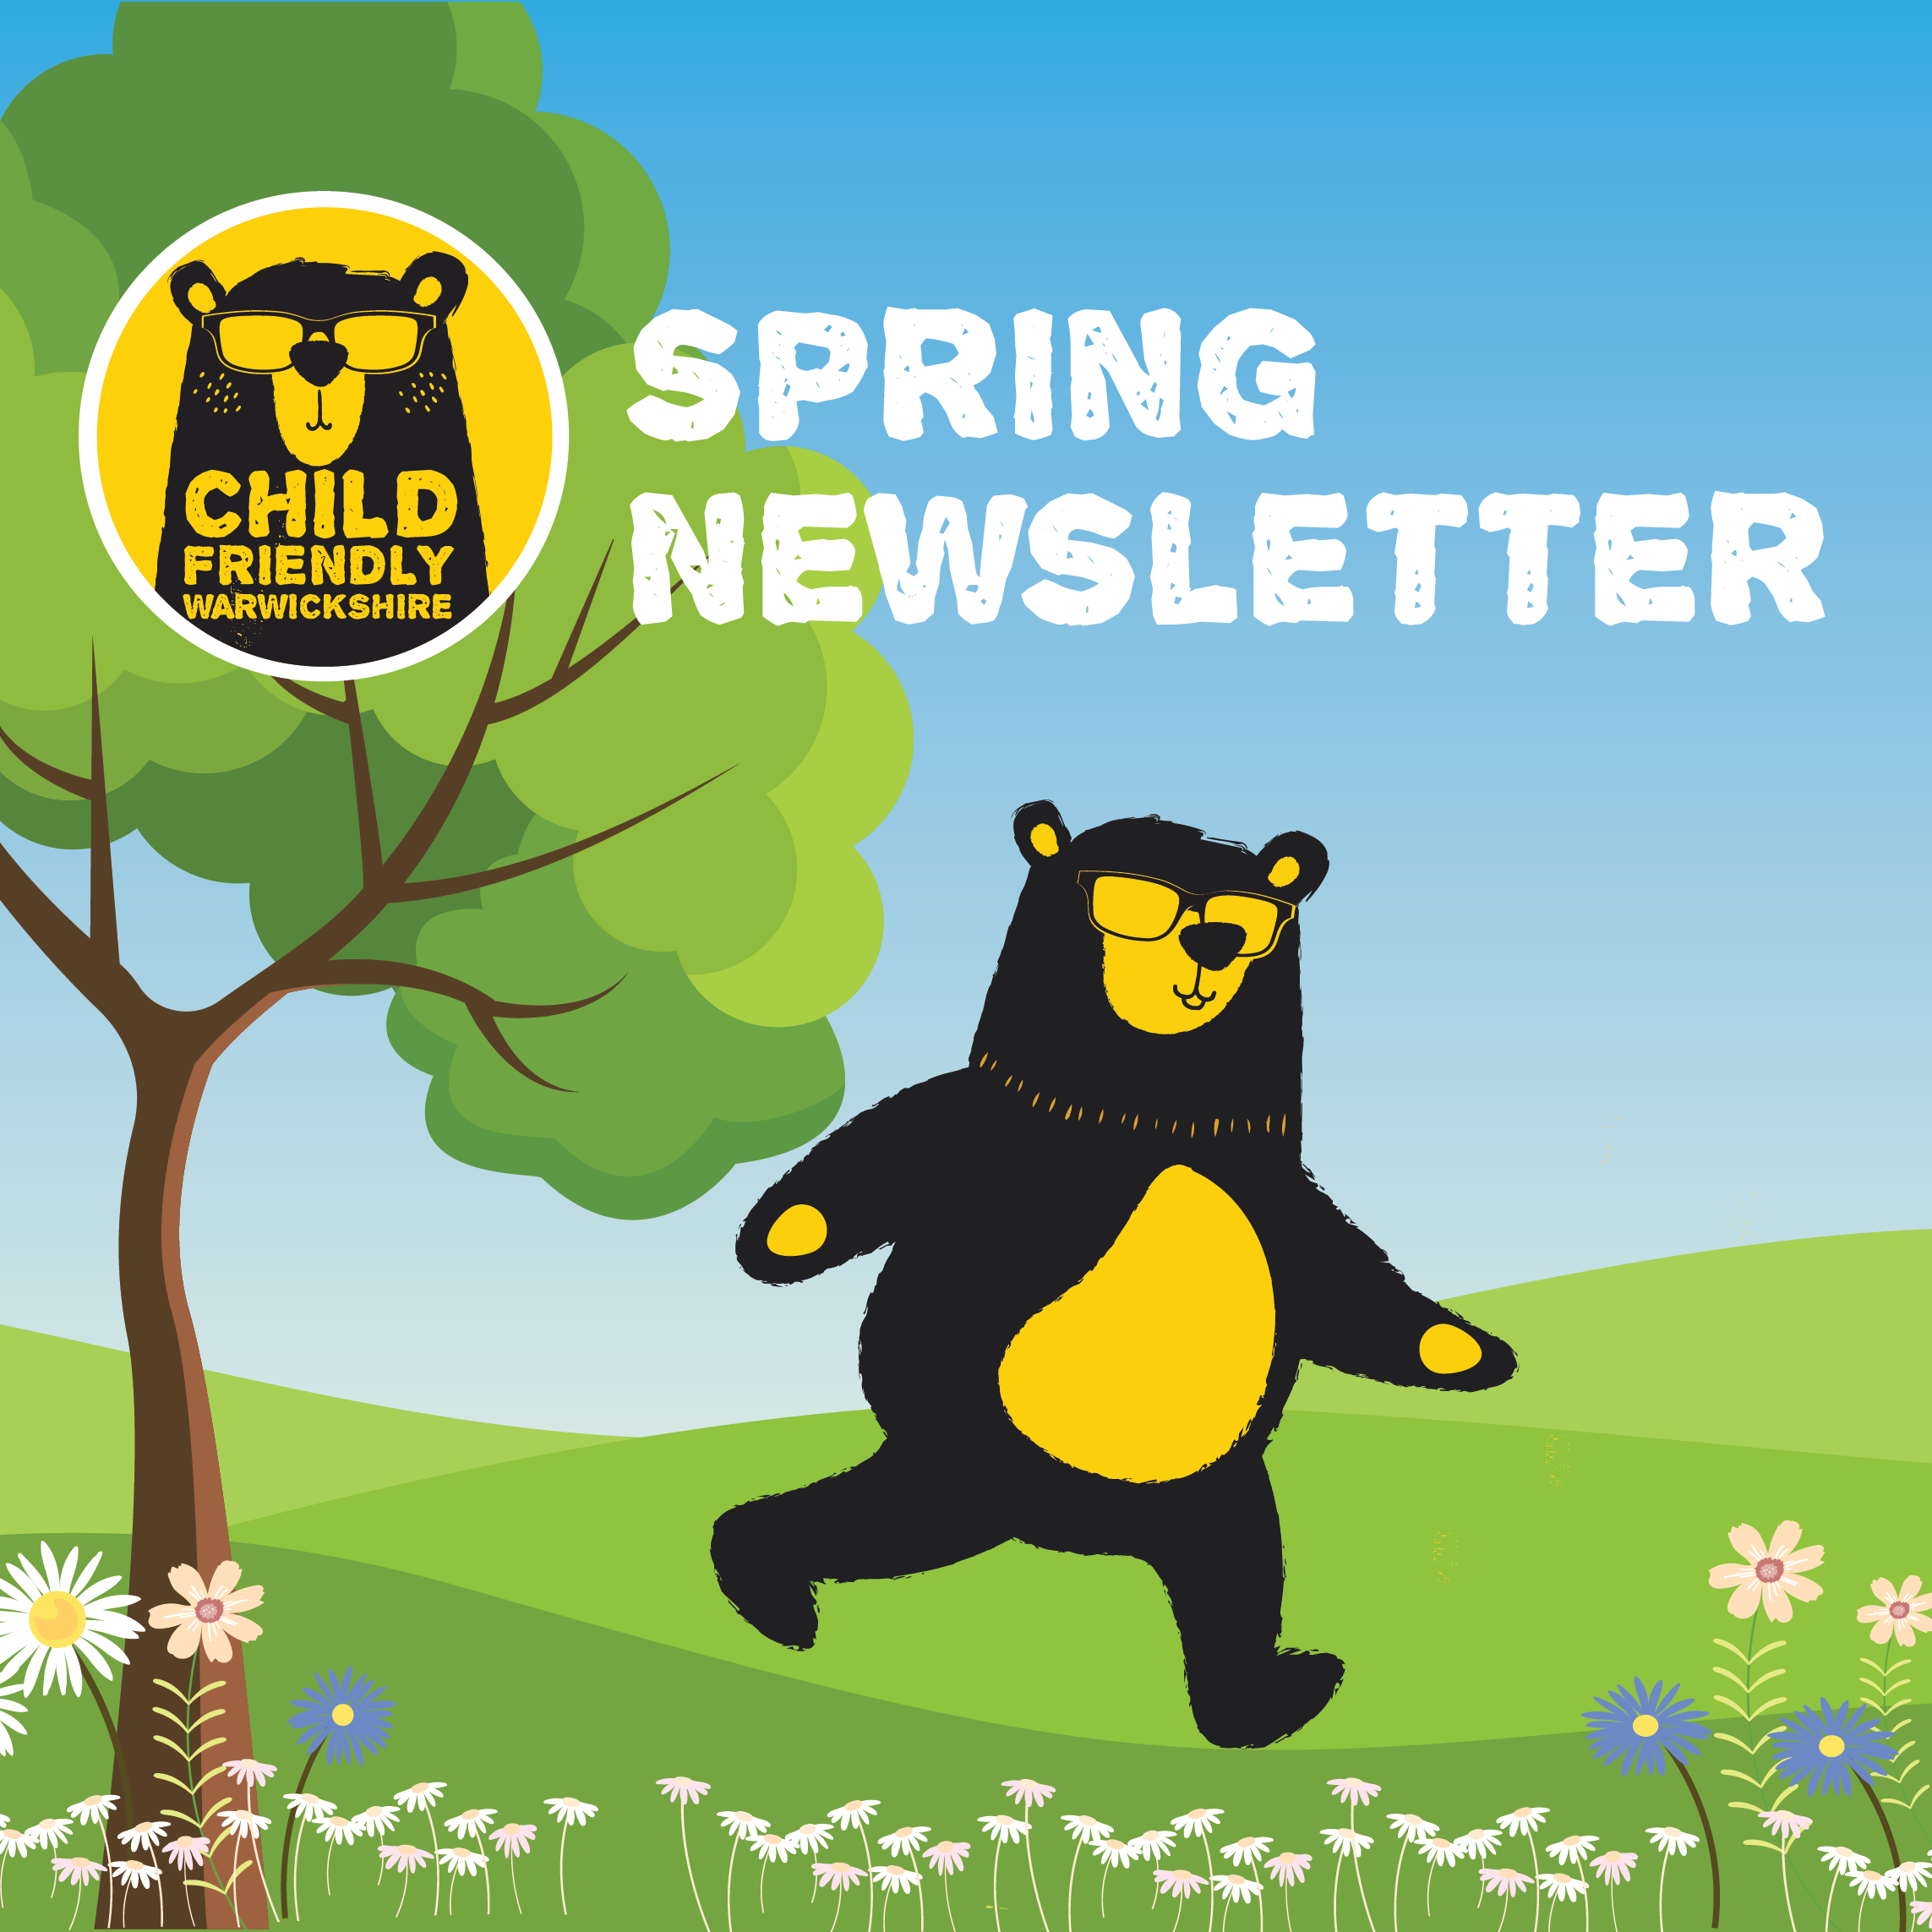 Spring newsletter promotional image of a bear walking in a spring field